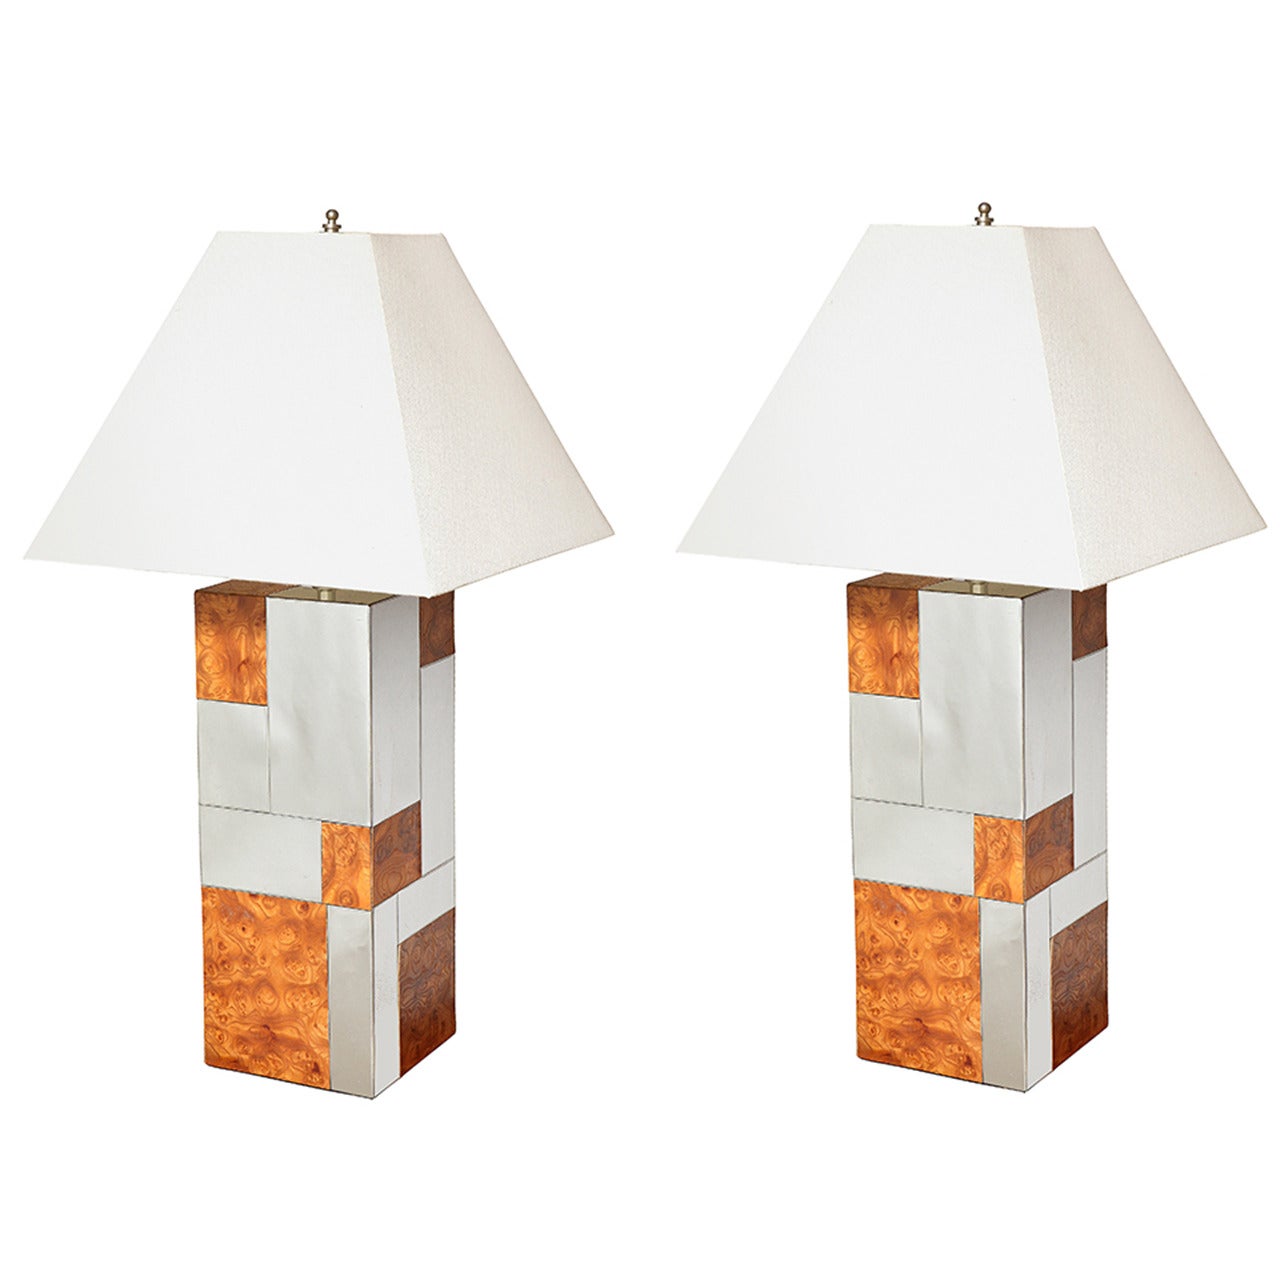 A Pair of Mid-Century Modern Table Lamps by Paul Evans 